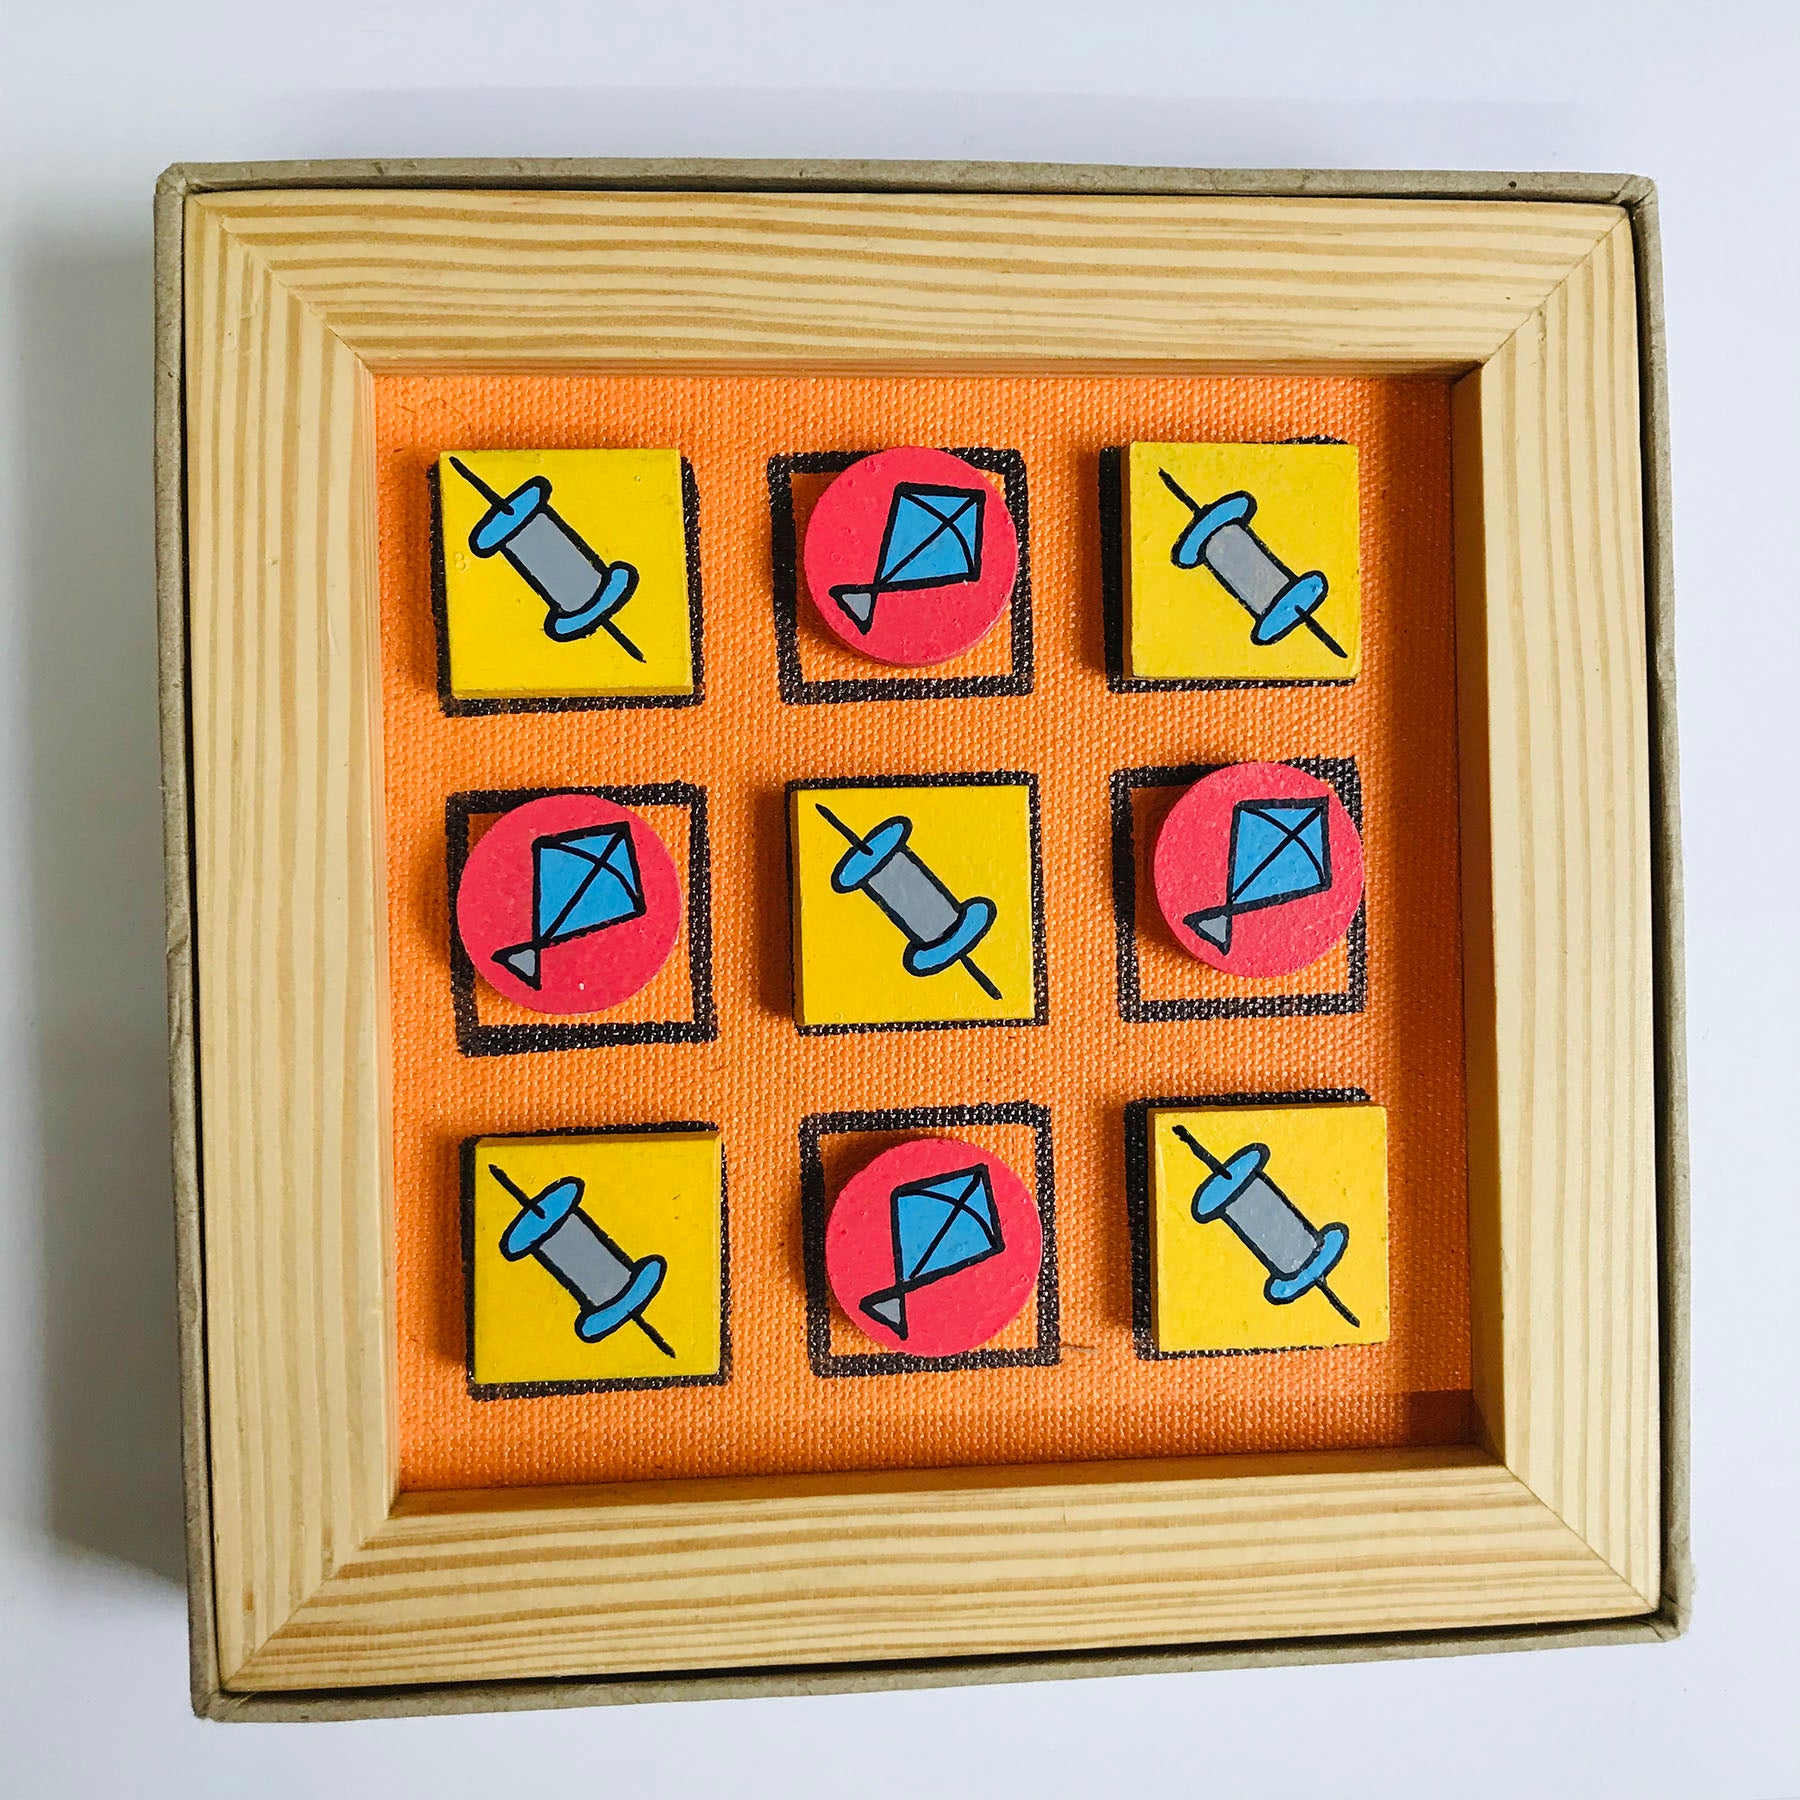 Handpainted Noughts and Crosses (Tic Tac Toe) board game